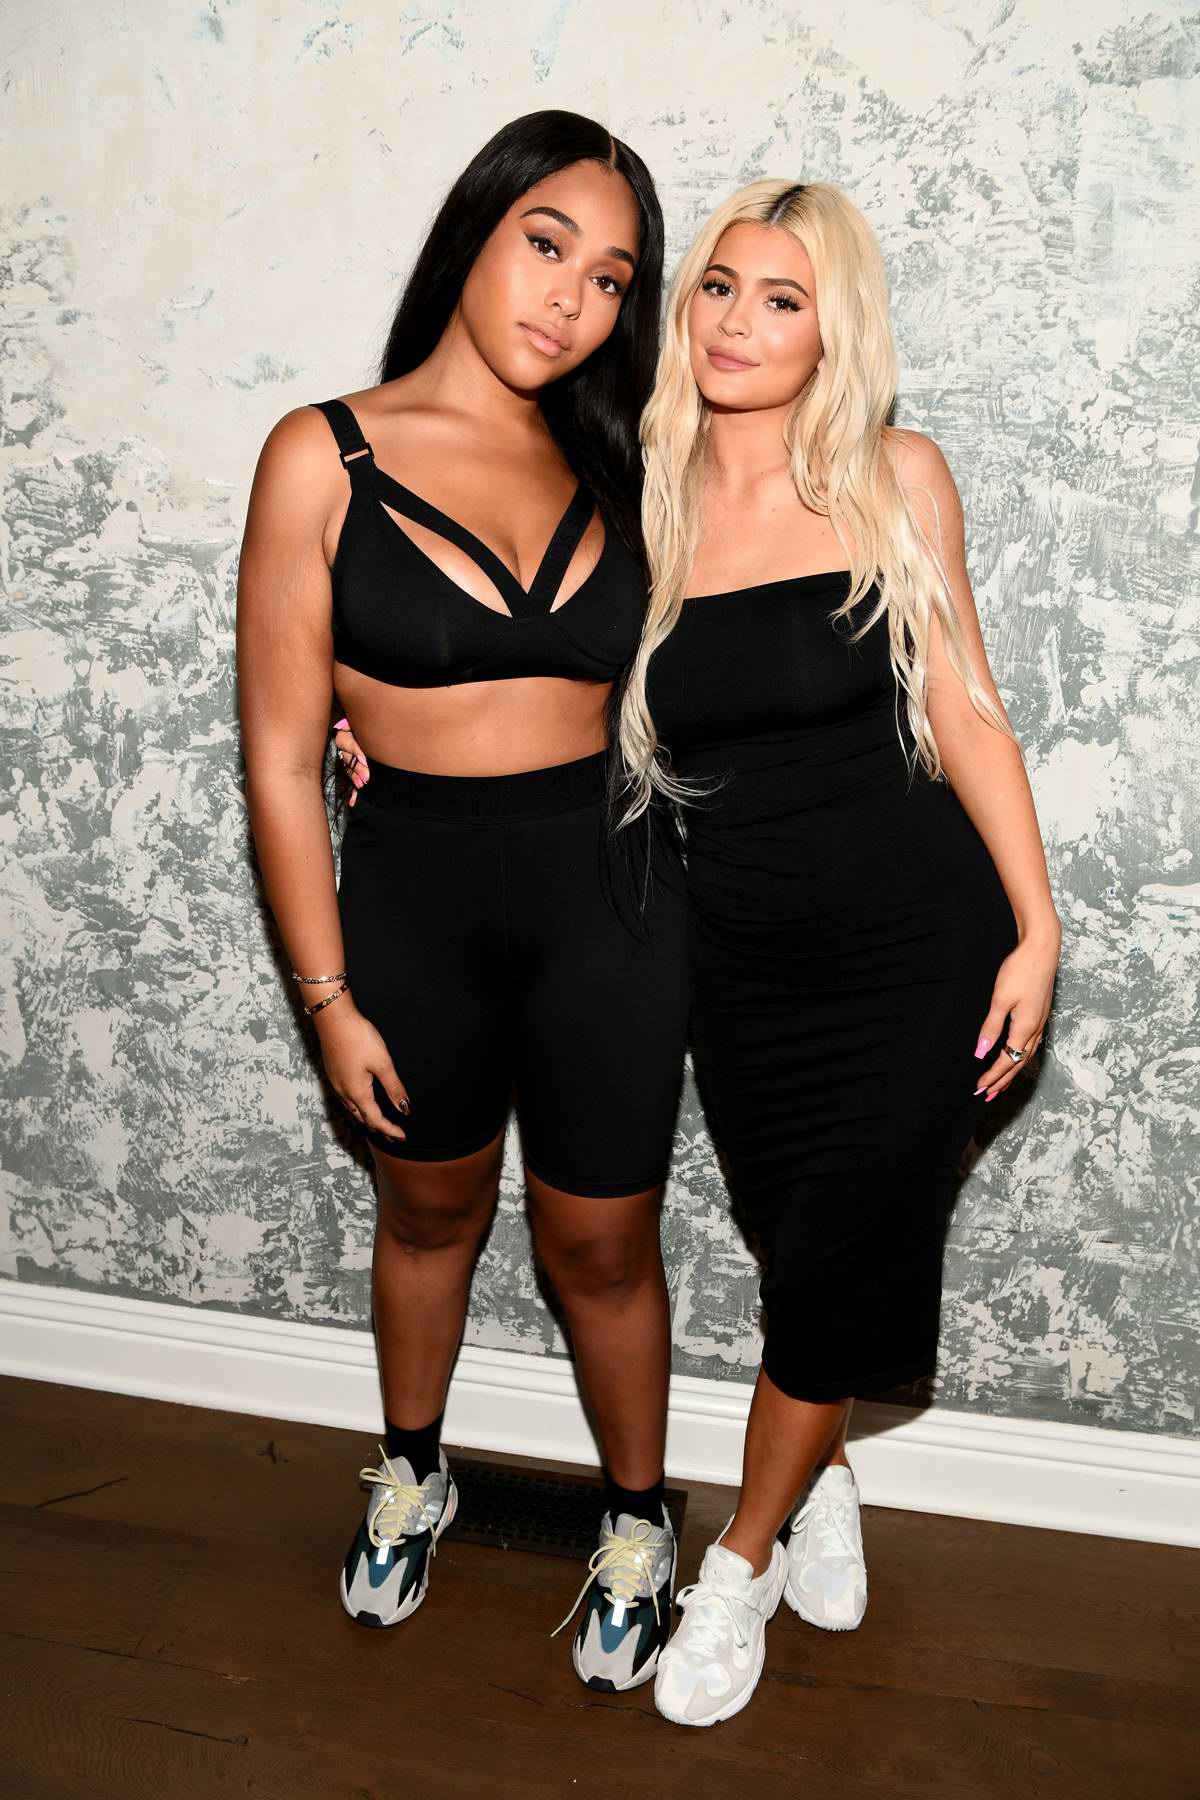 Jordyn Woods steps out in black dress at premiere in first appearance since  taking lie detector test